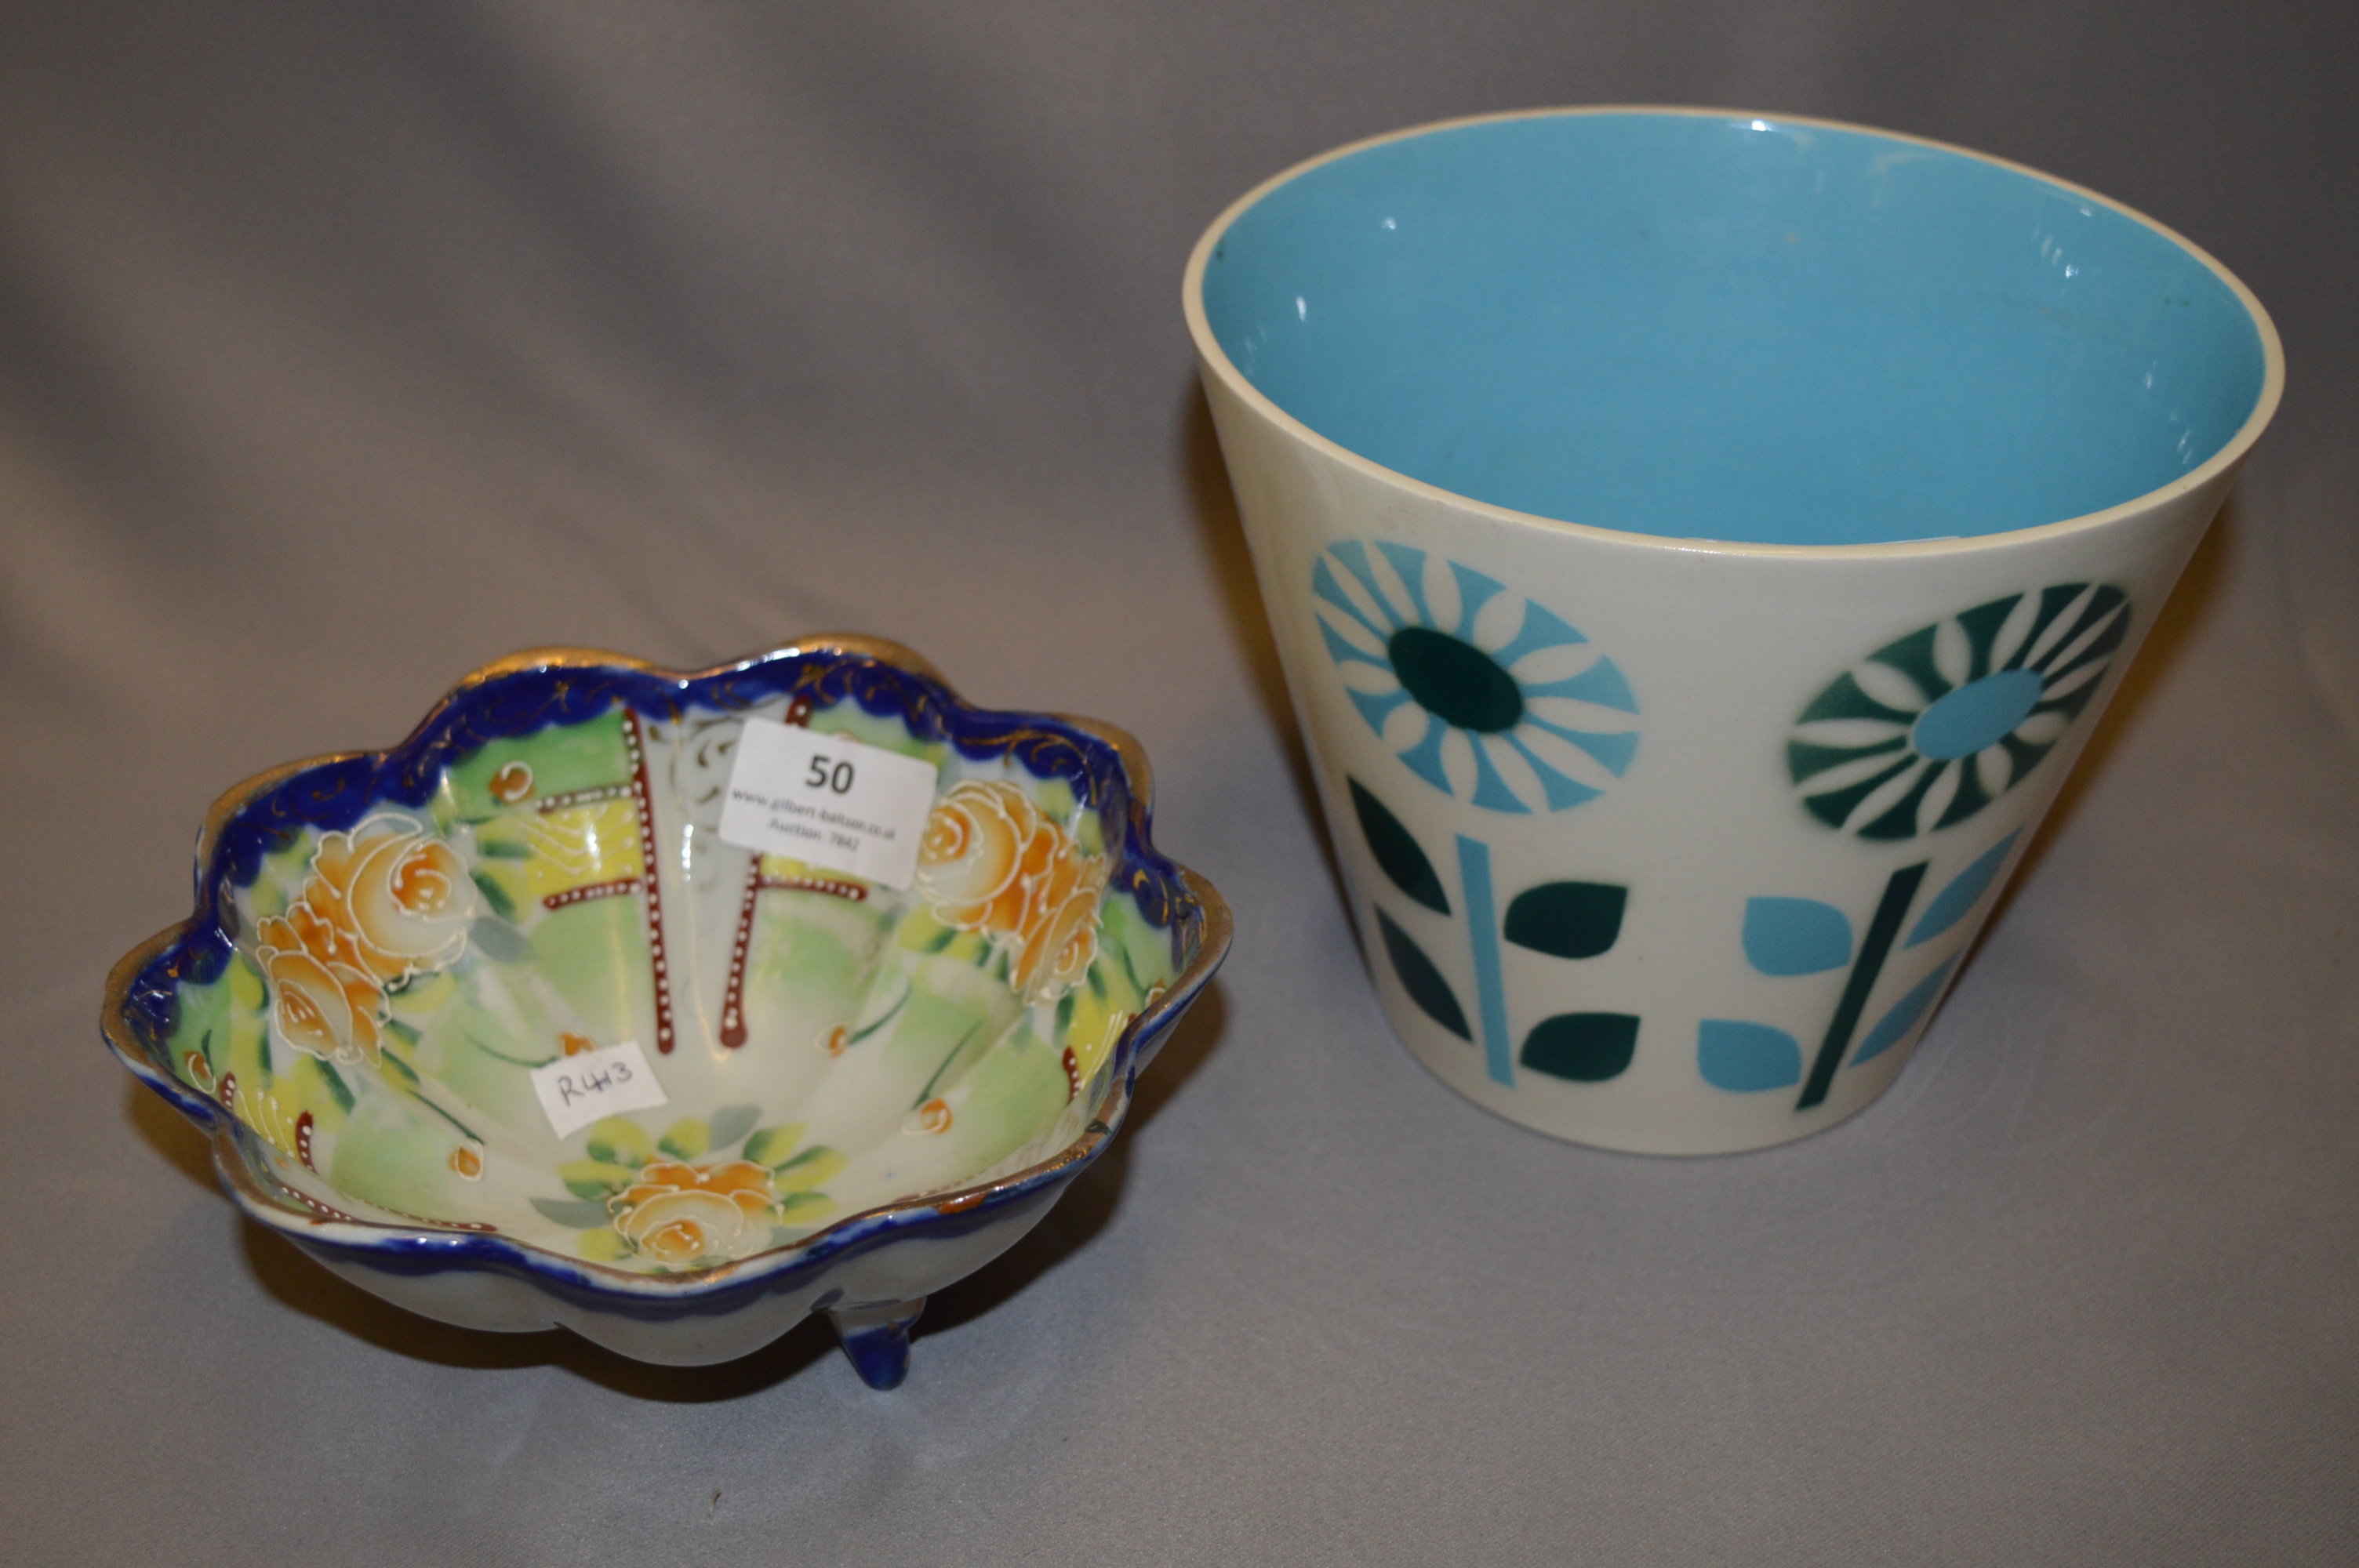 Japanese Painted Dish and a Hornsea Sunflower Pottery Jardiniere by John Clappison